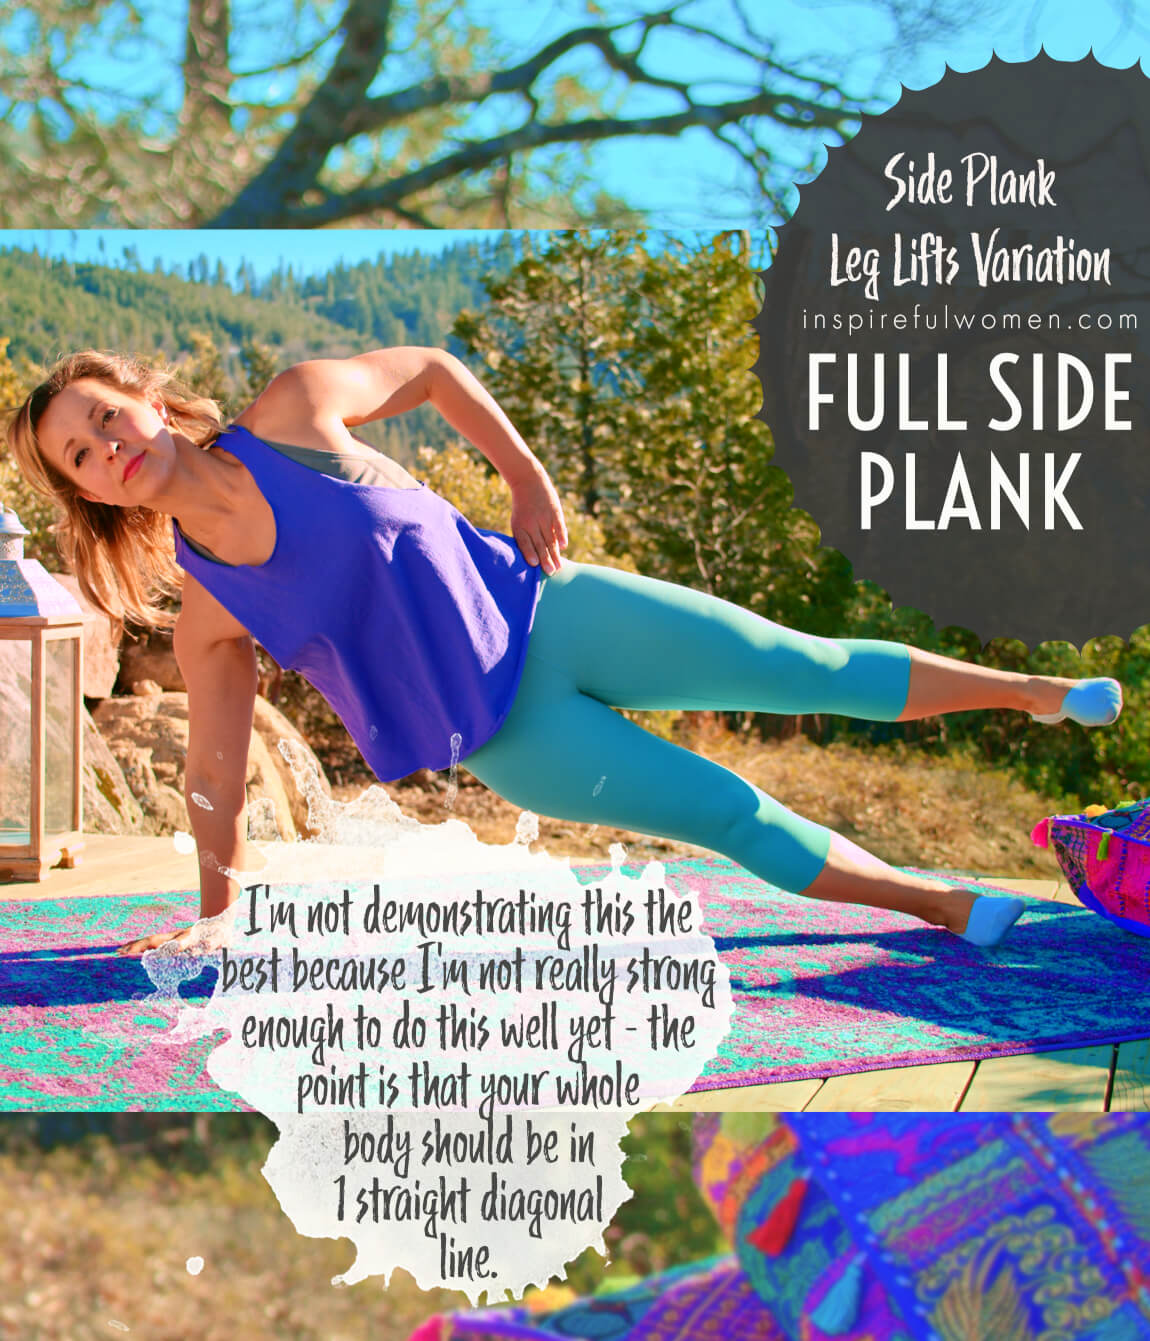 full-side-plank-leg-lifts-hip-abduction-glute-exercise-variation